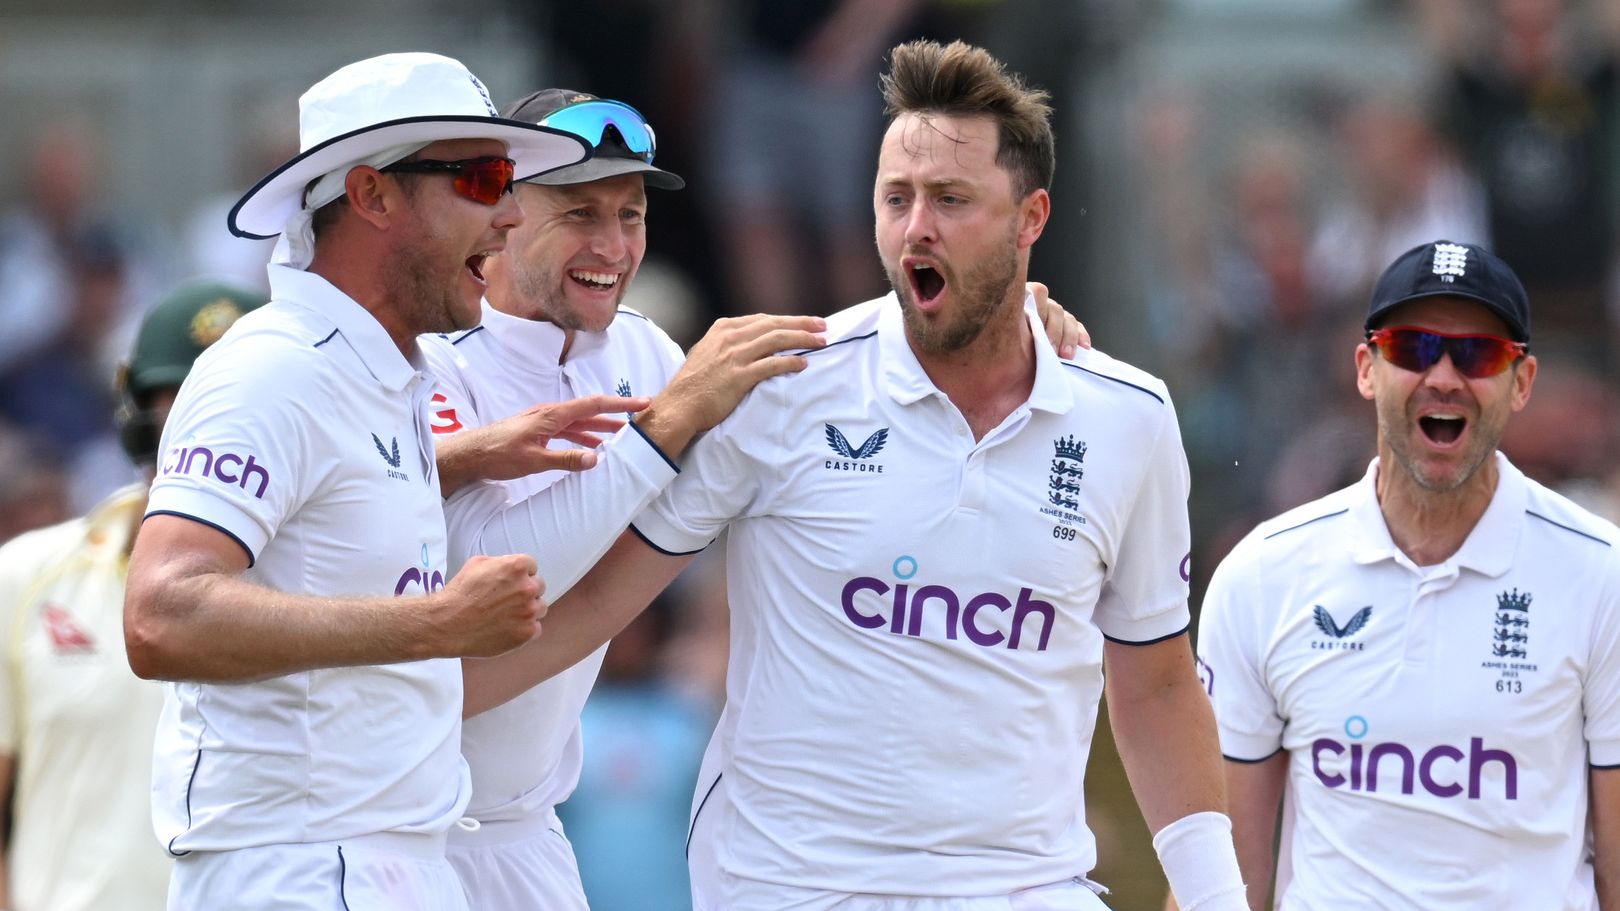 Ollie Robinson of England celebrates bowling Usman Khawaja of Australia with team mates during Day Three of the first Ashes Test match between England and Australia at Edgbaston.